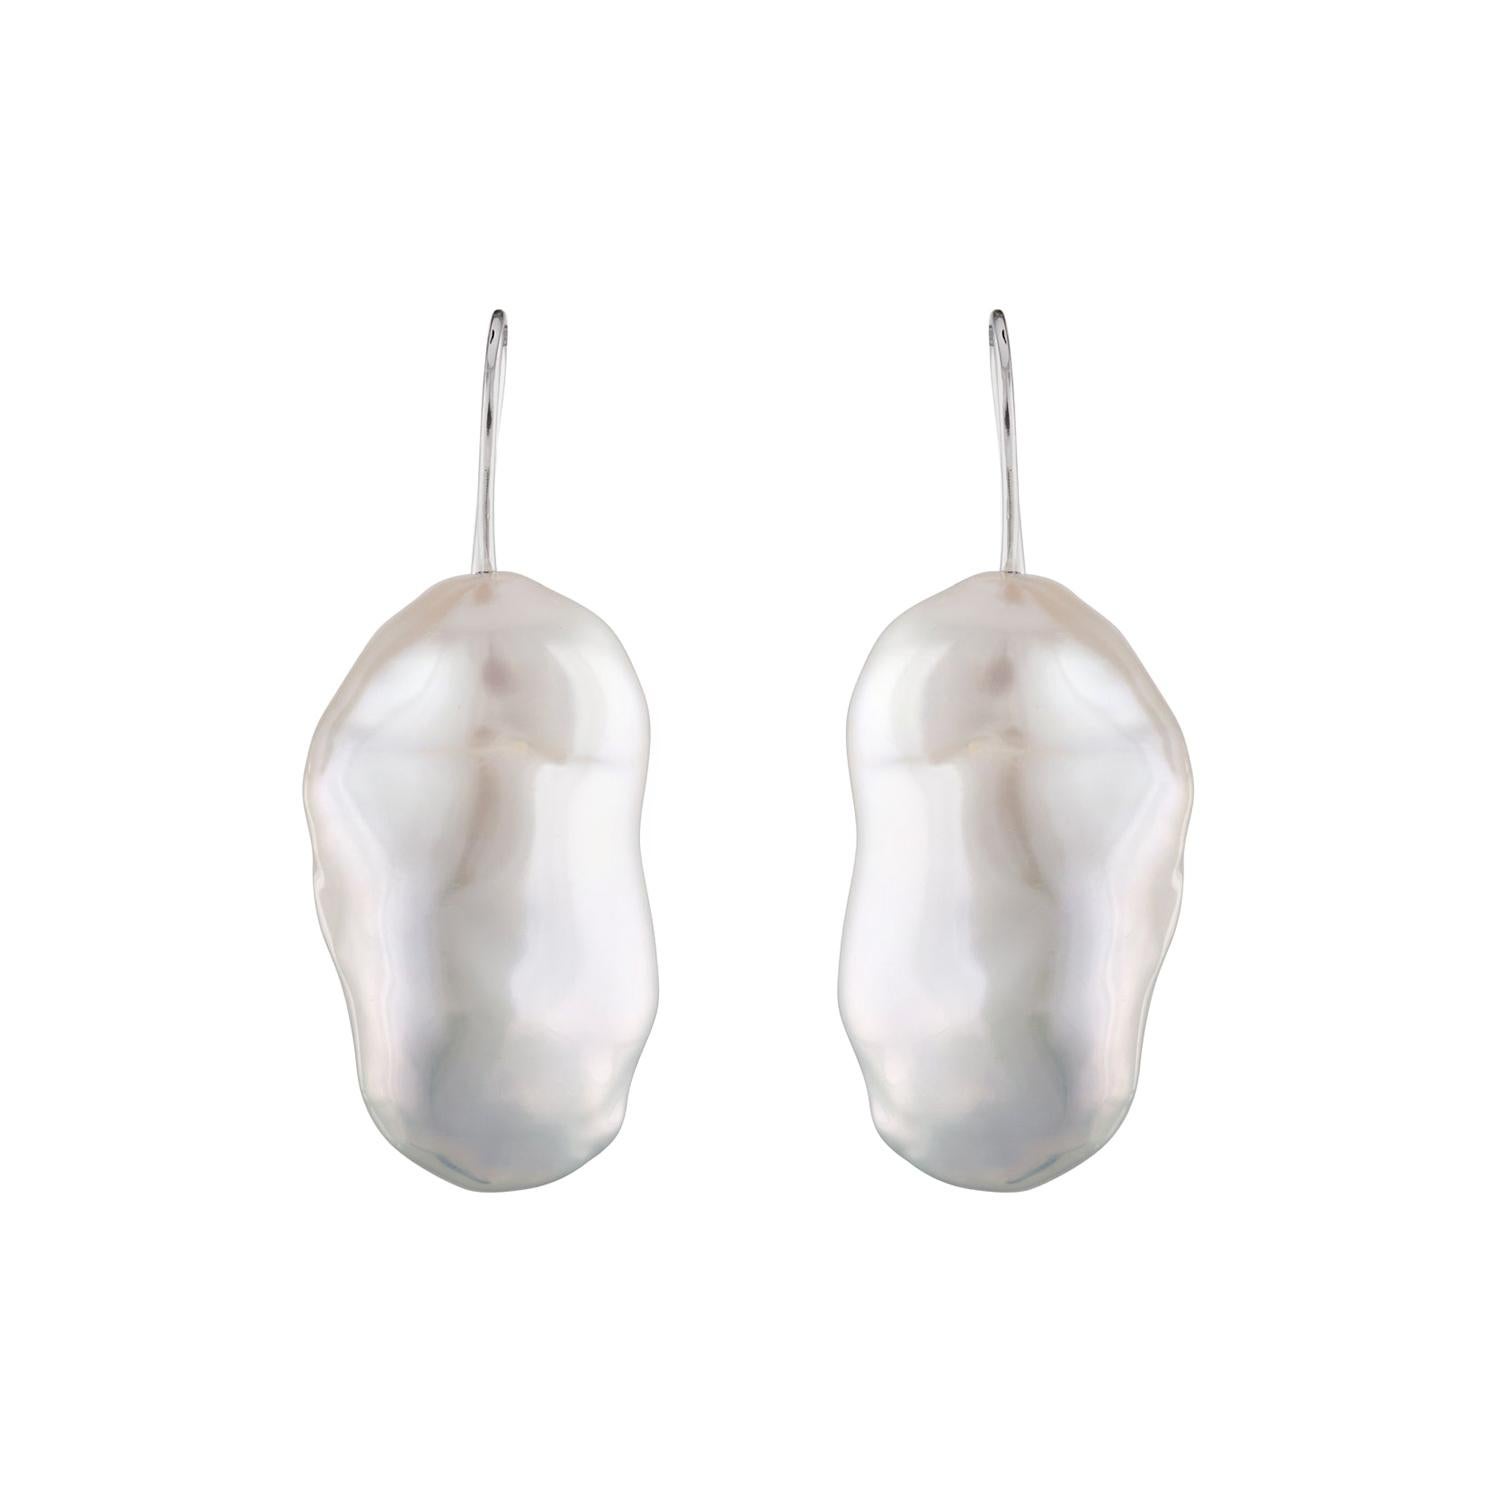 Freshwater White Baroque Cultured Pearl Dangle Earrings in 14 Karat White Gold For Sale